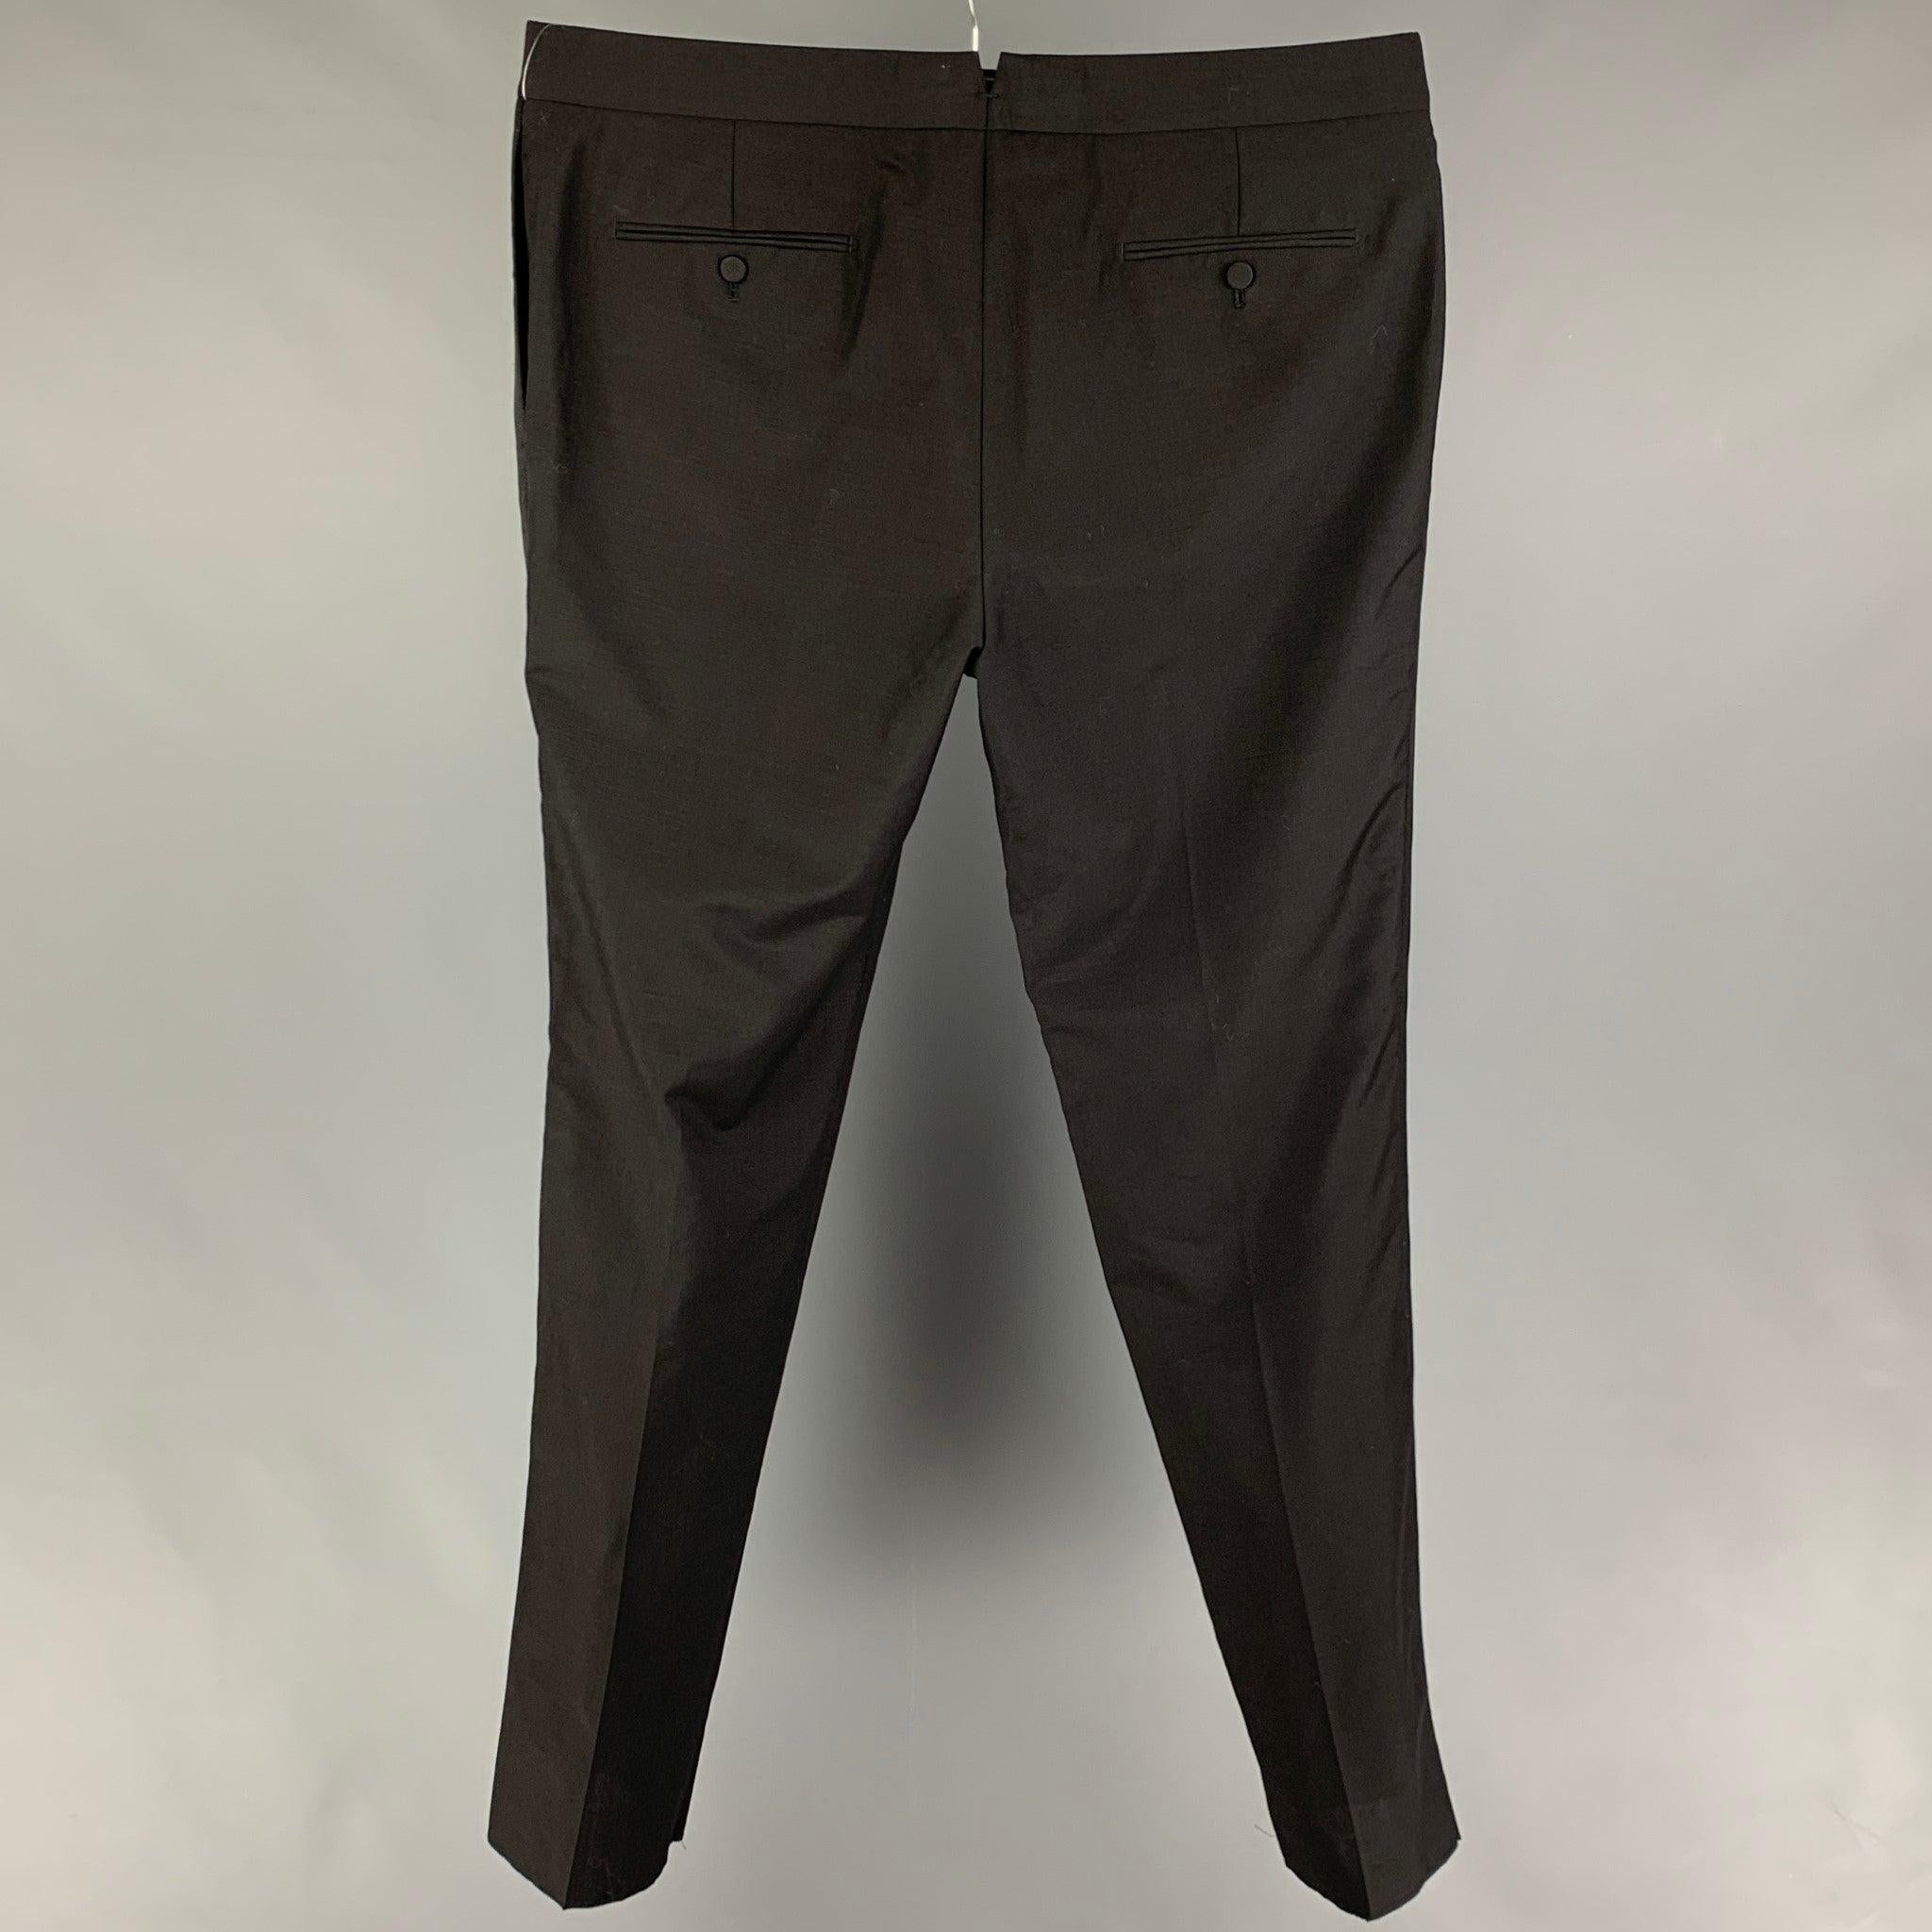 ALEXANDER McQUEEN tuxedo pants comes in a black wool / mohair featuring a flat front, ribbon trim, front tab, and a zip fly closure. Made in Italy.
Excellent
Pre-Owned Condition. 

Marked:  58 

Measurements: 
 Waist: 40 inches Rise:
12.5 inches